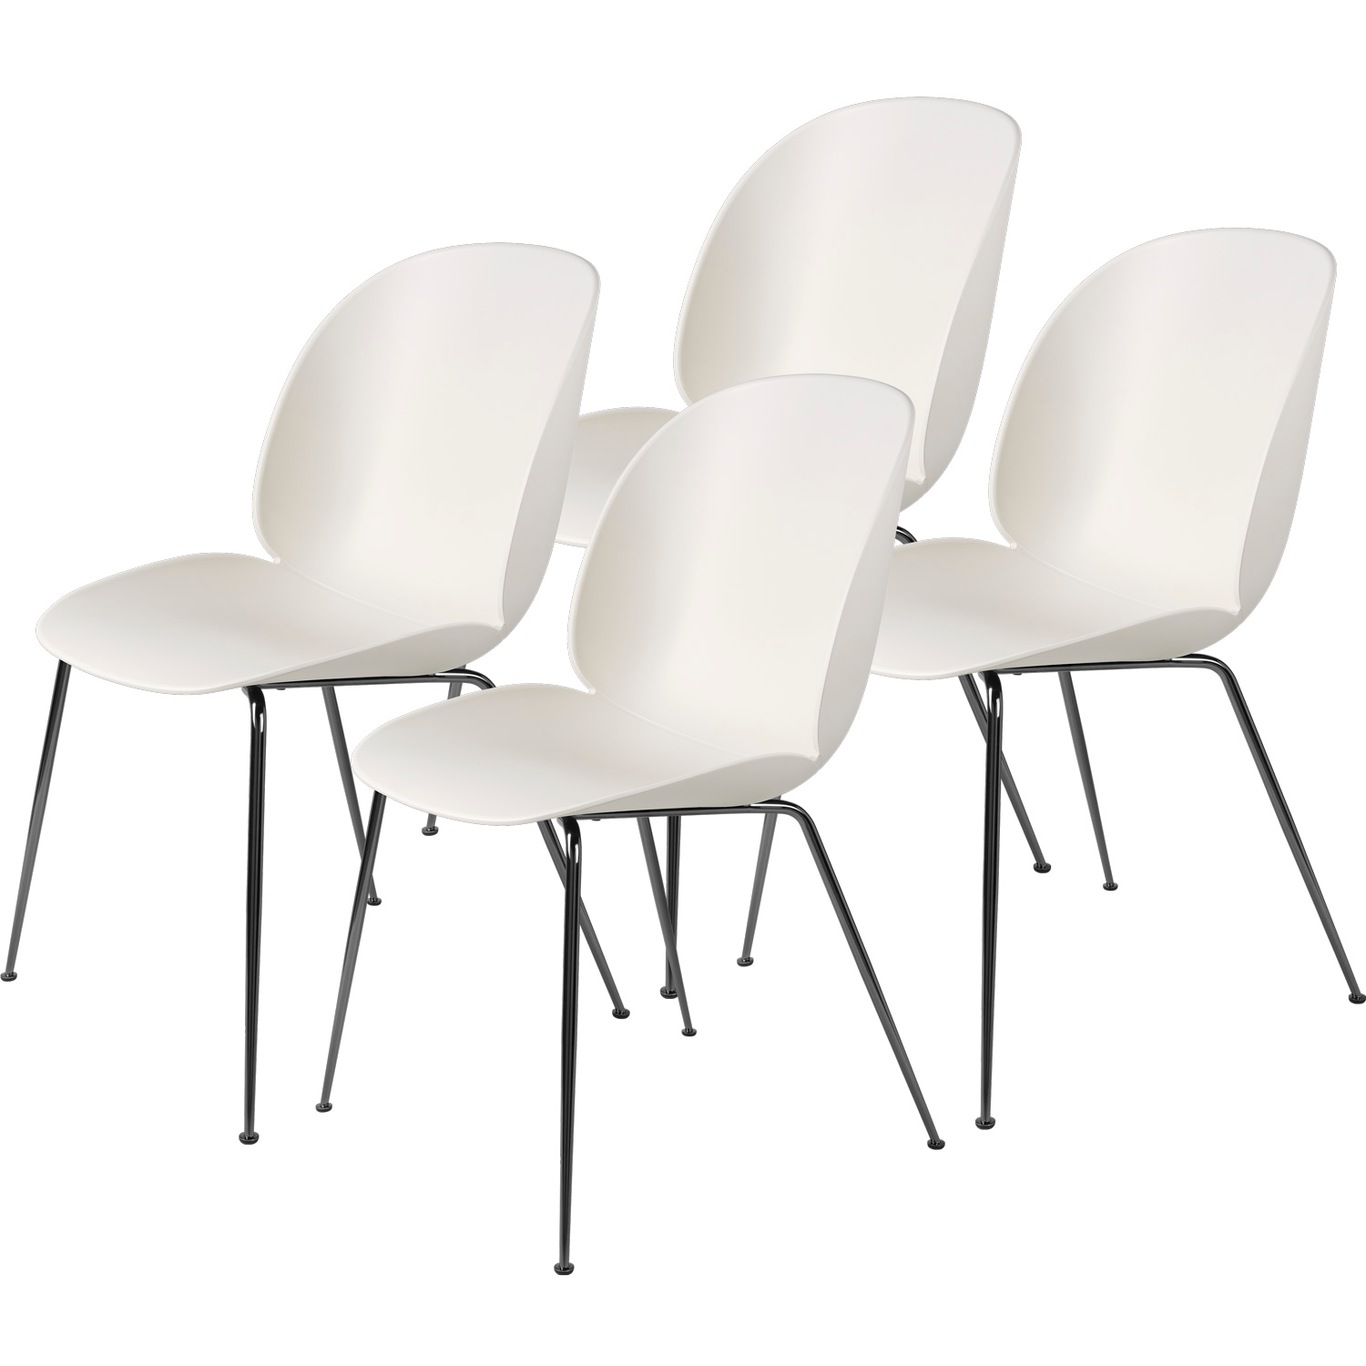 Beetle Dining Chair Unupholstered, Conic Base Black, Set Of 4, Alabaster White